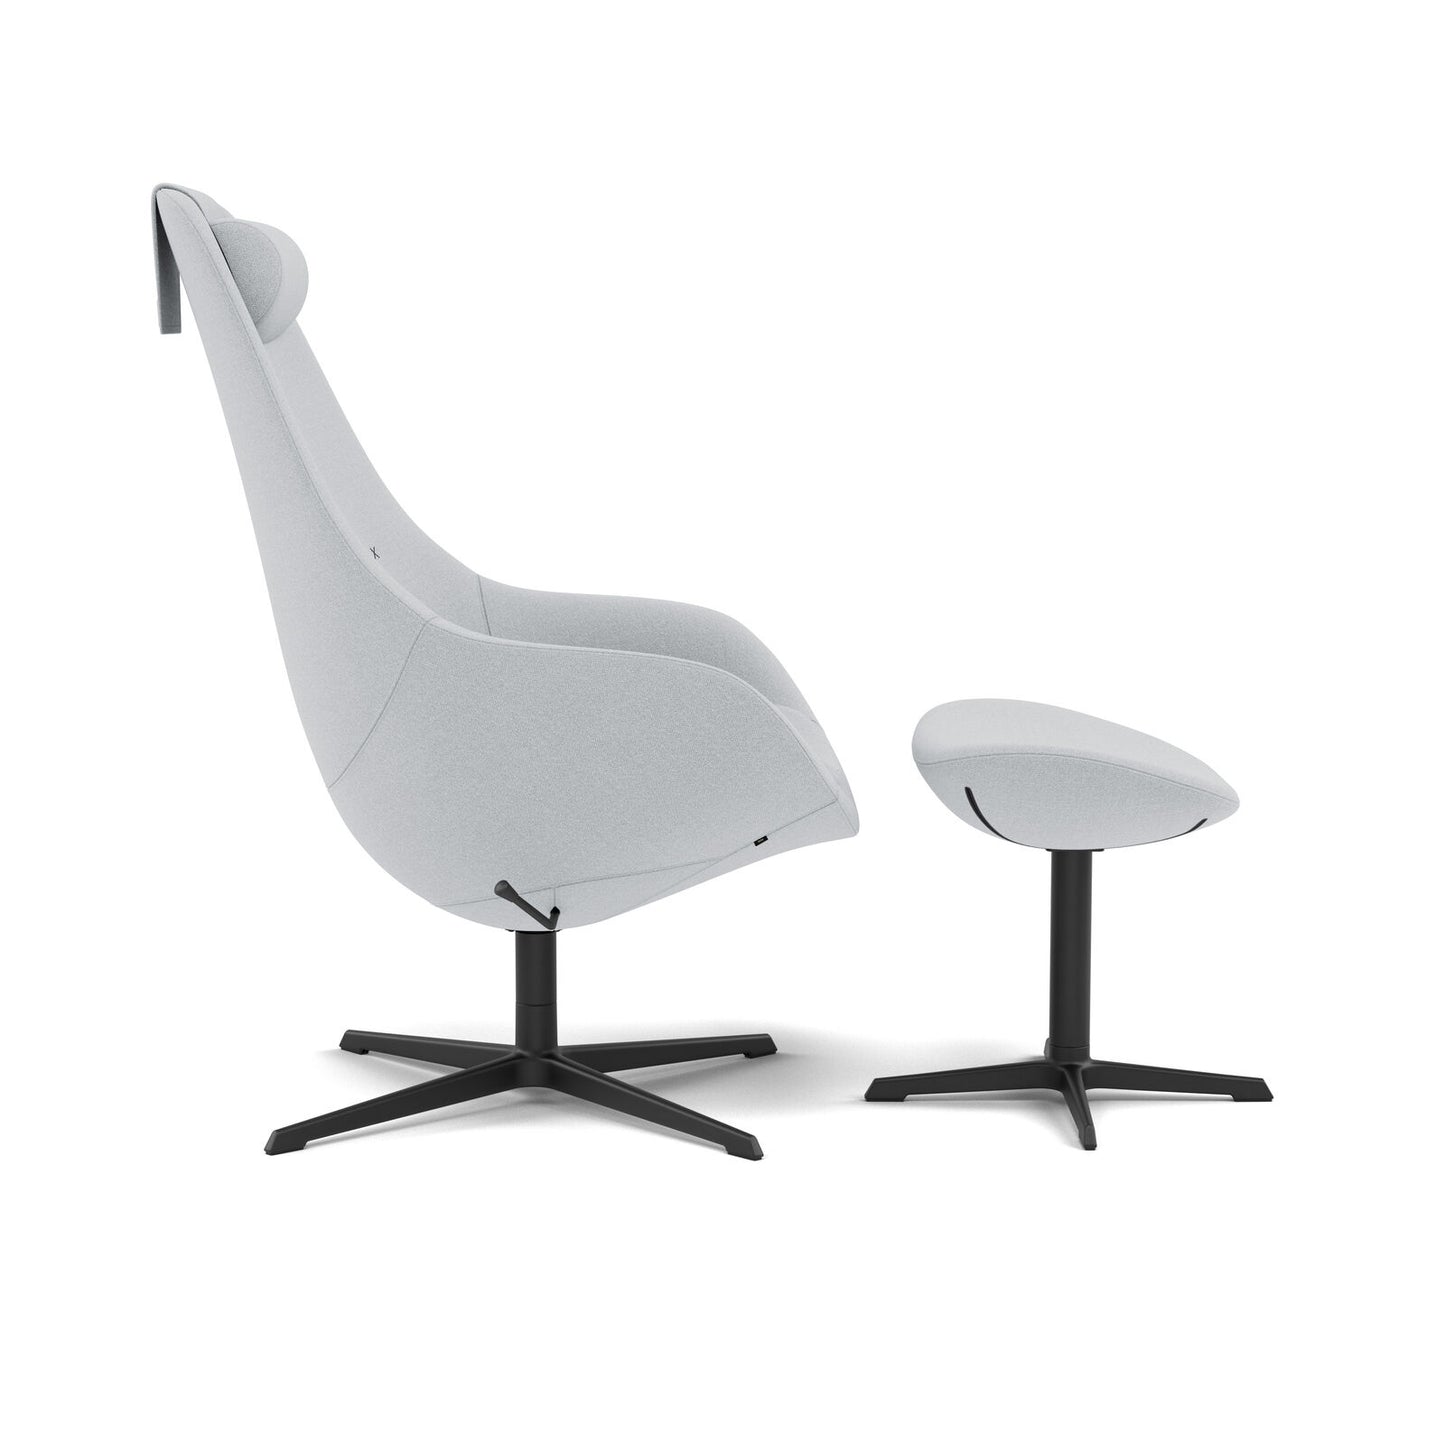 kokon with footrest chair by varier - light grey - view from the side 2